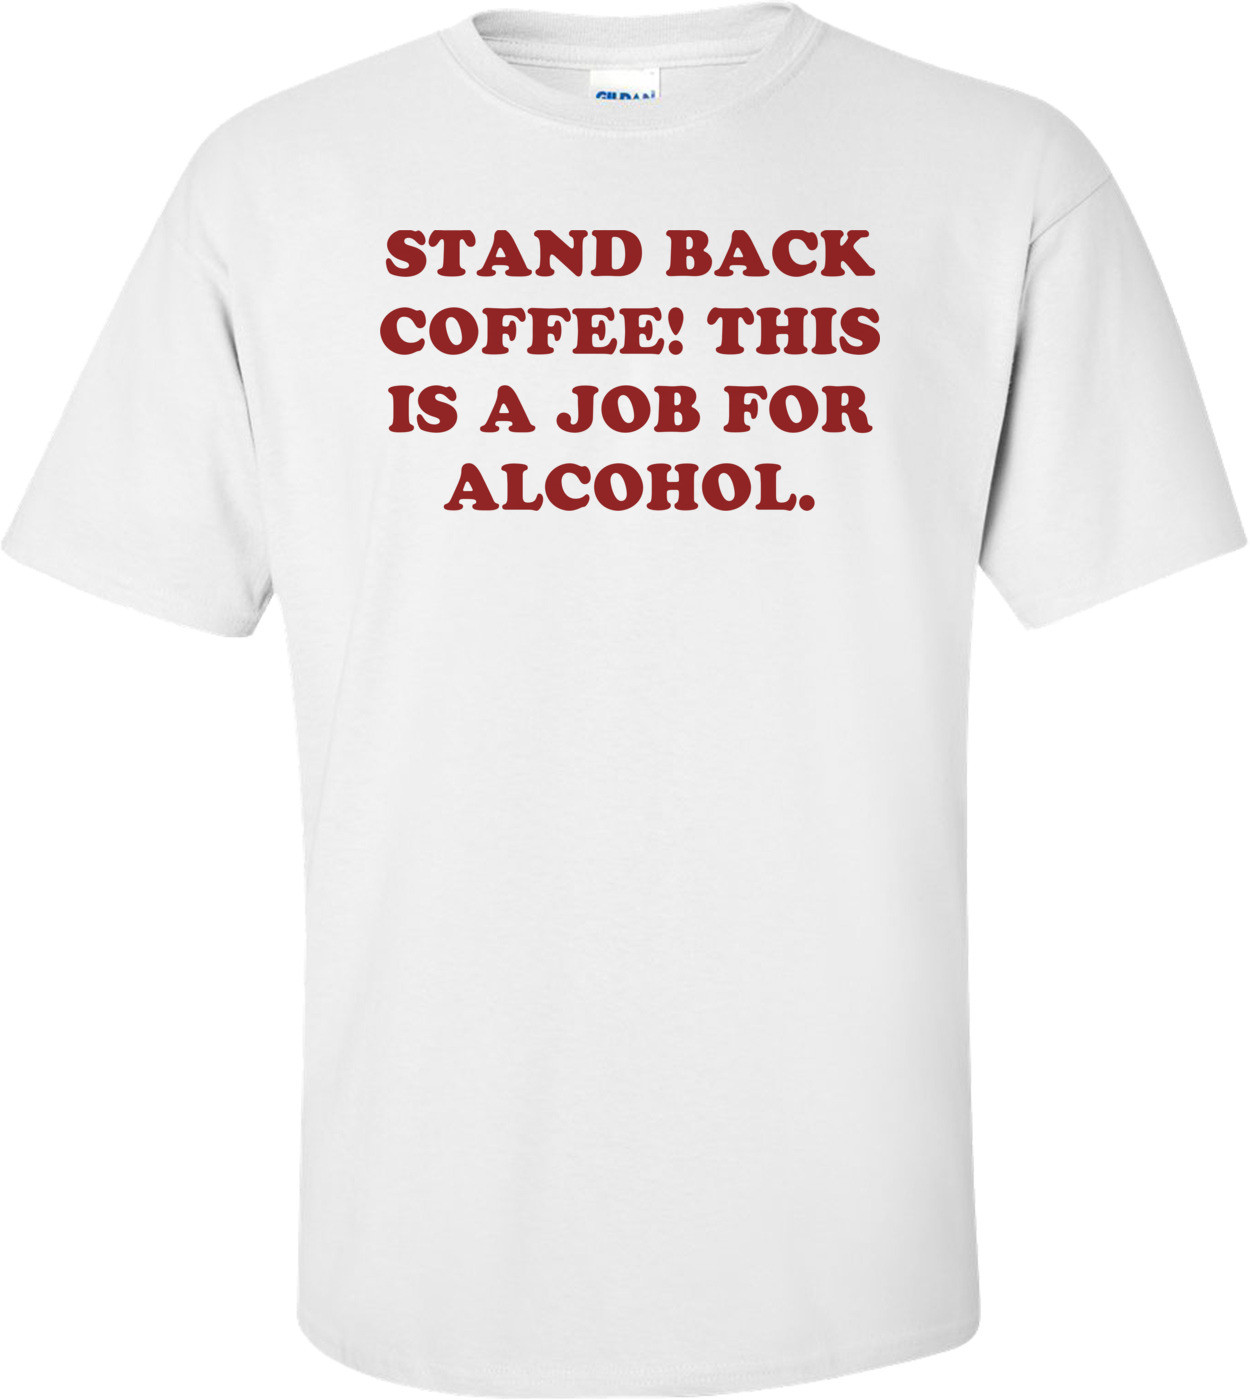 STAND BACK COFFEE! THIS IS A JOB FOR ALCOHOL.